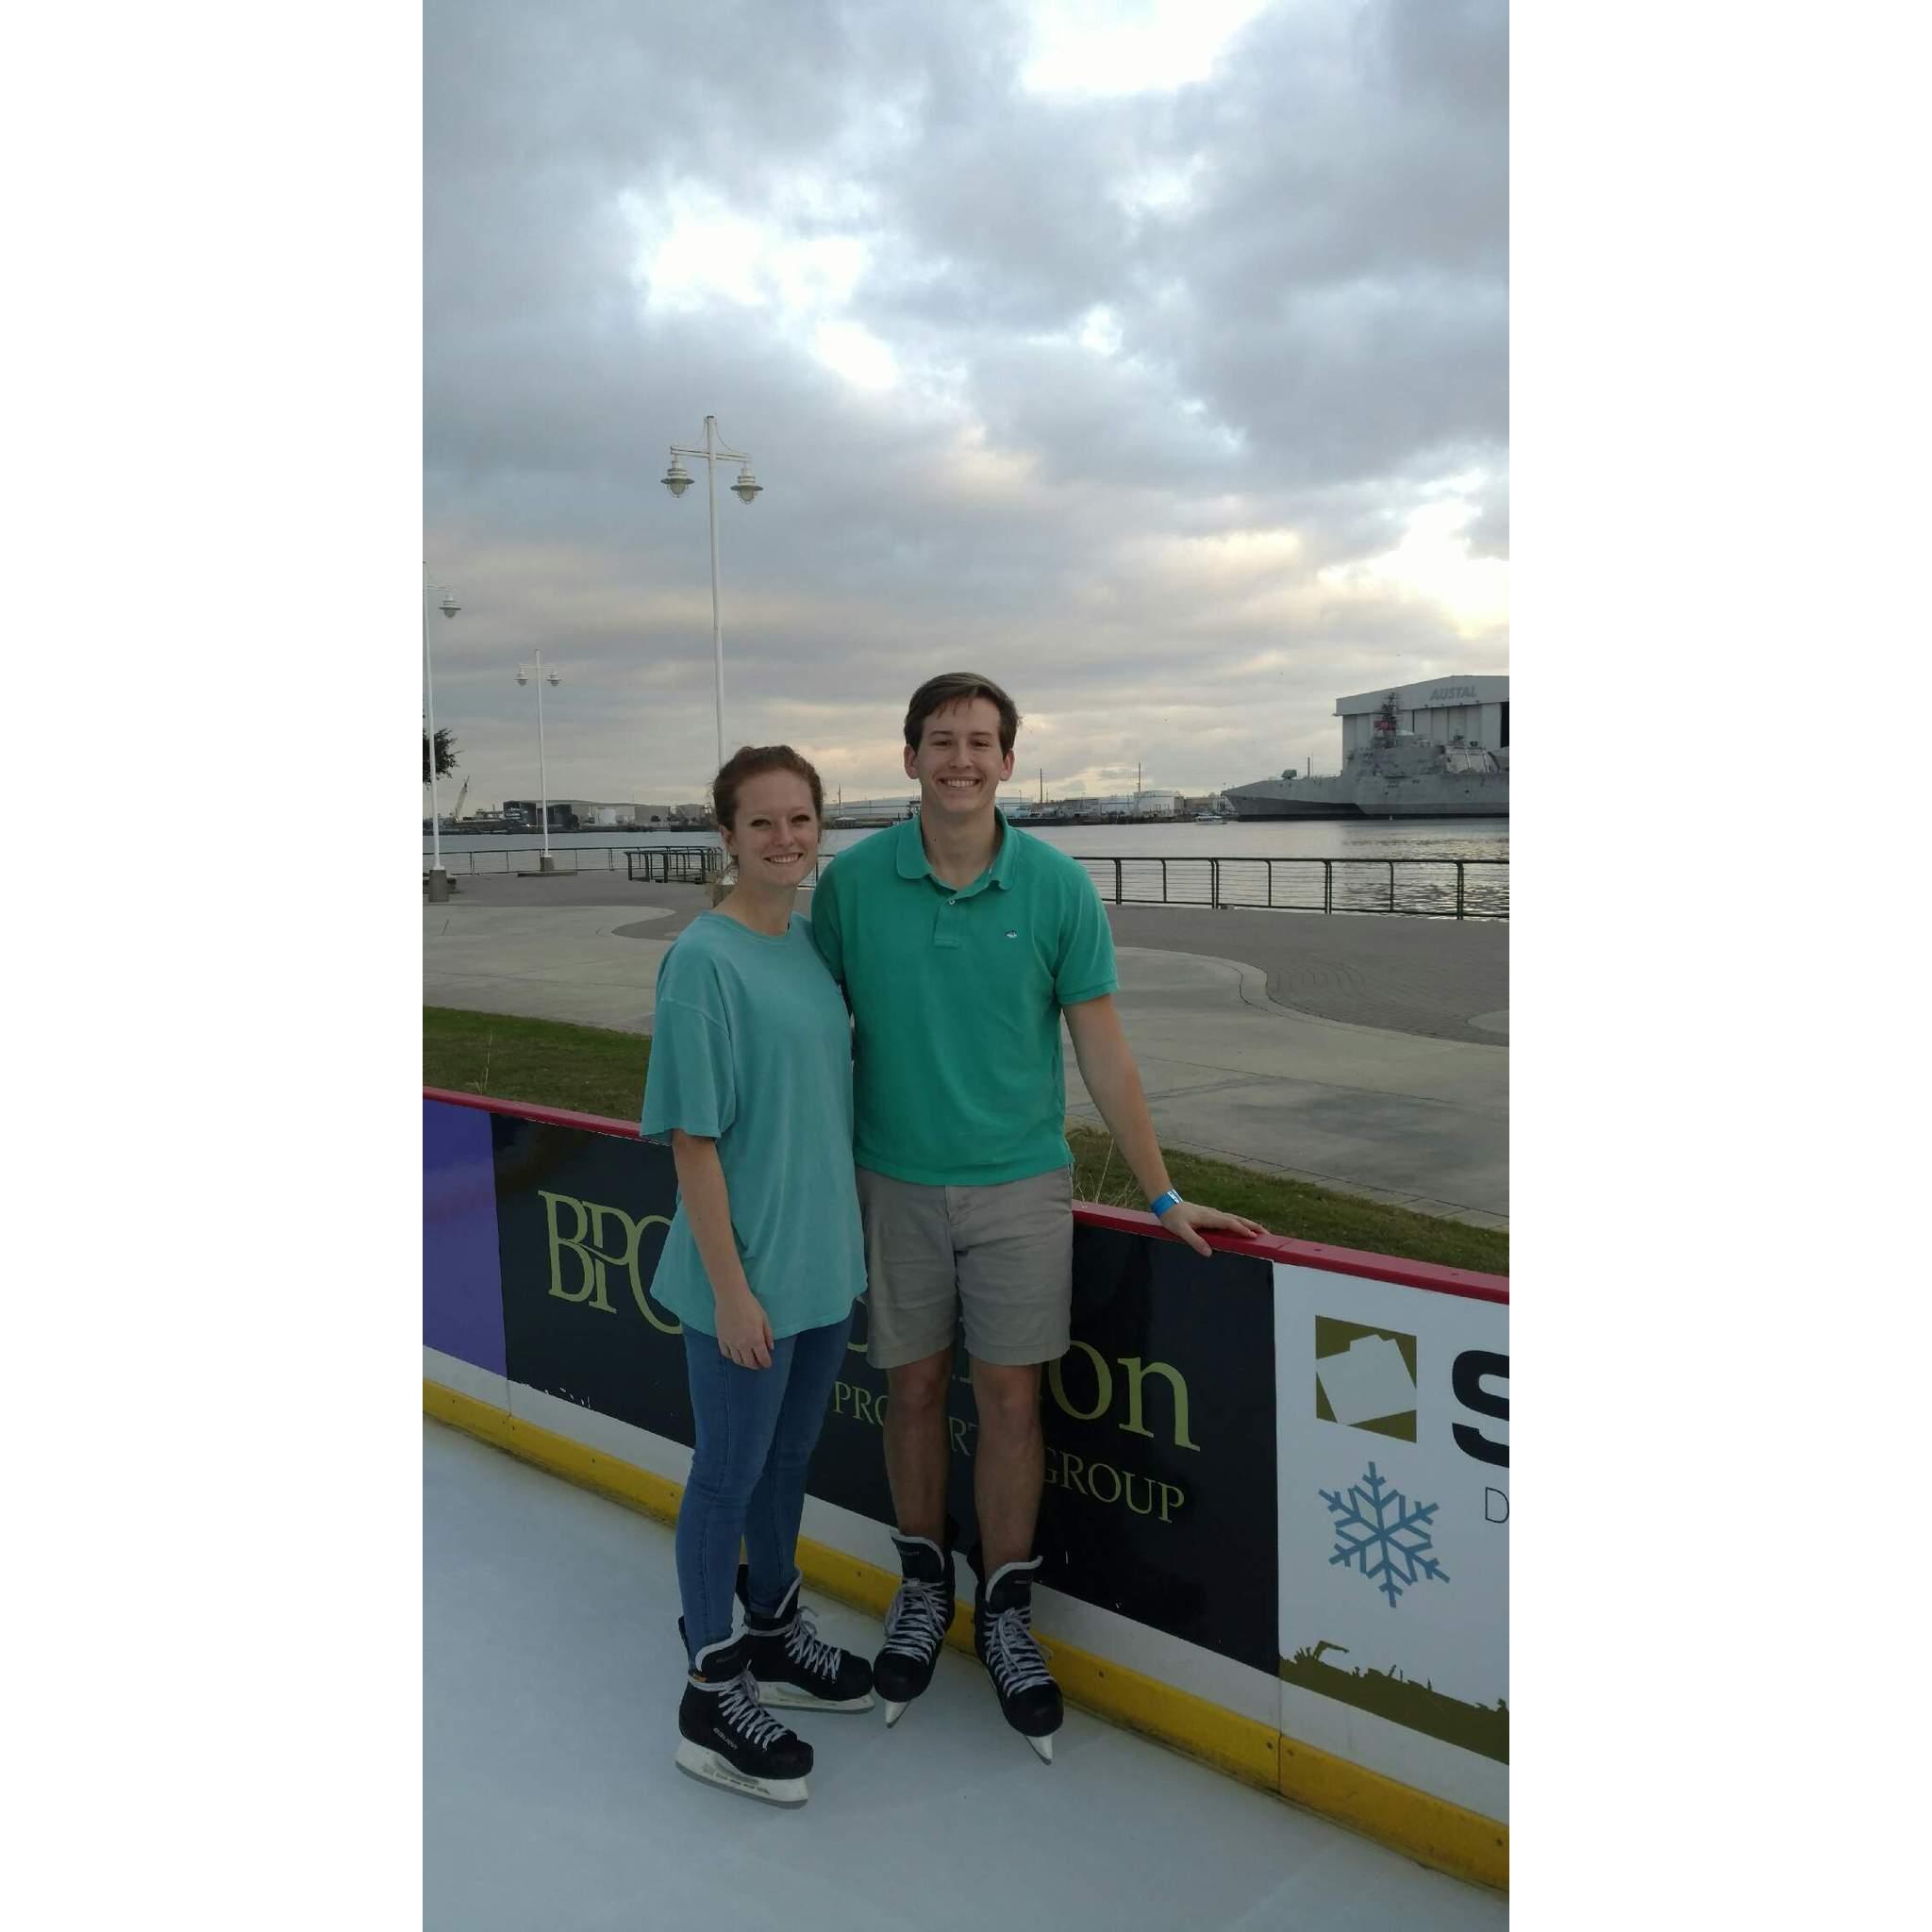 Ice Skating in Mobile (it was a little warm outside)